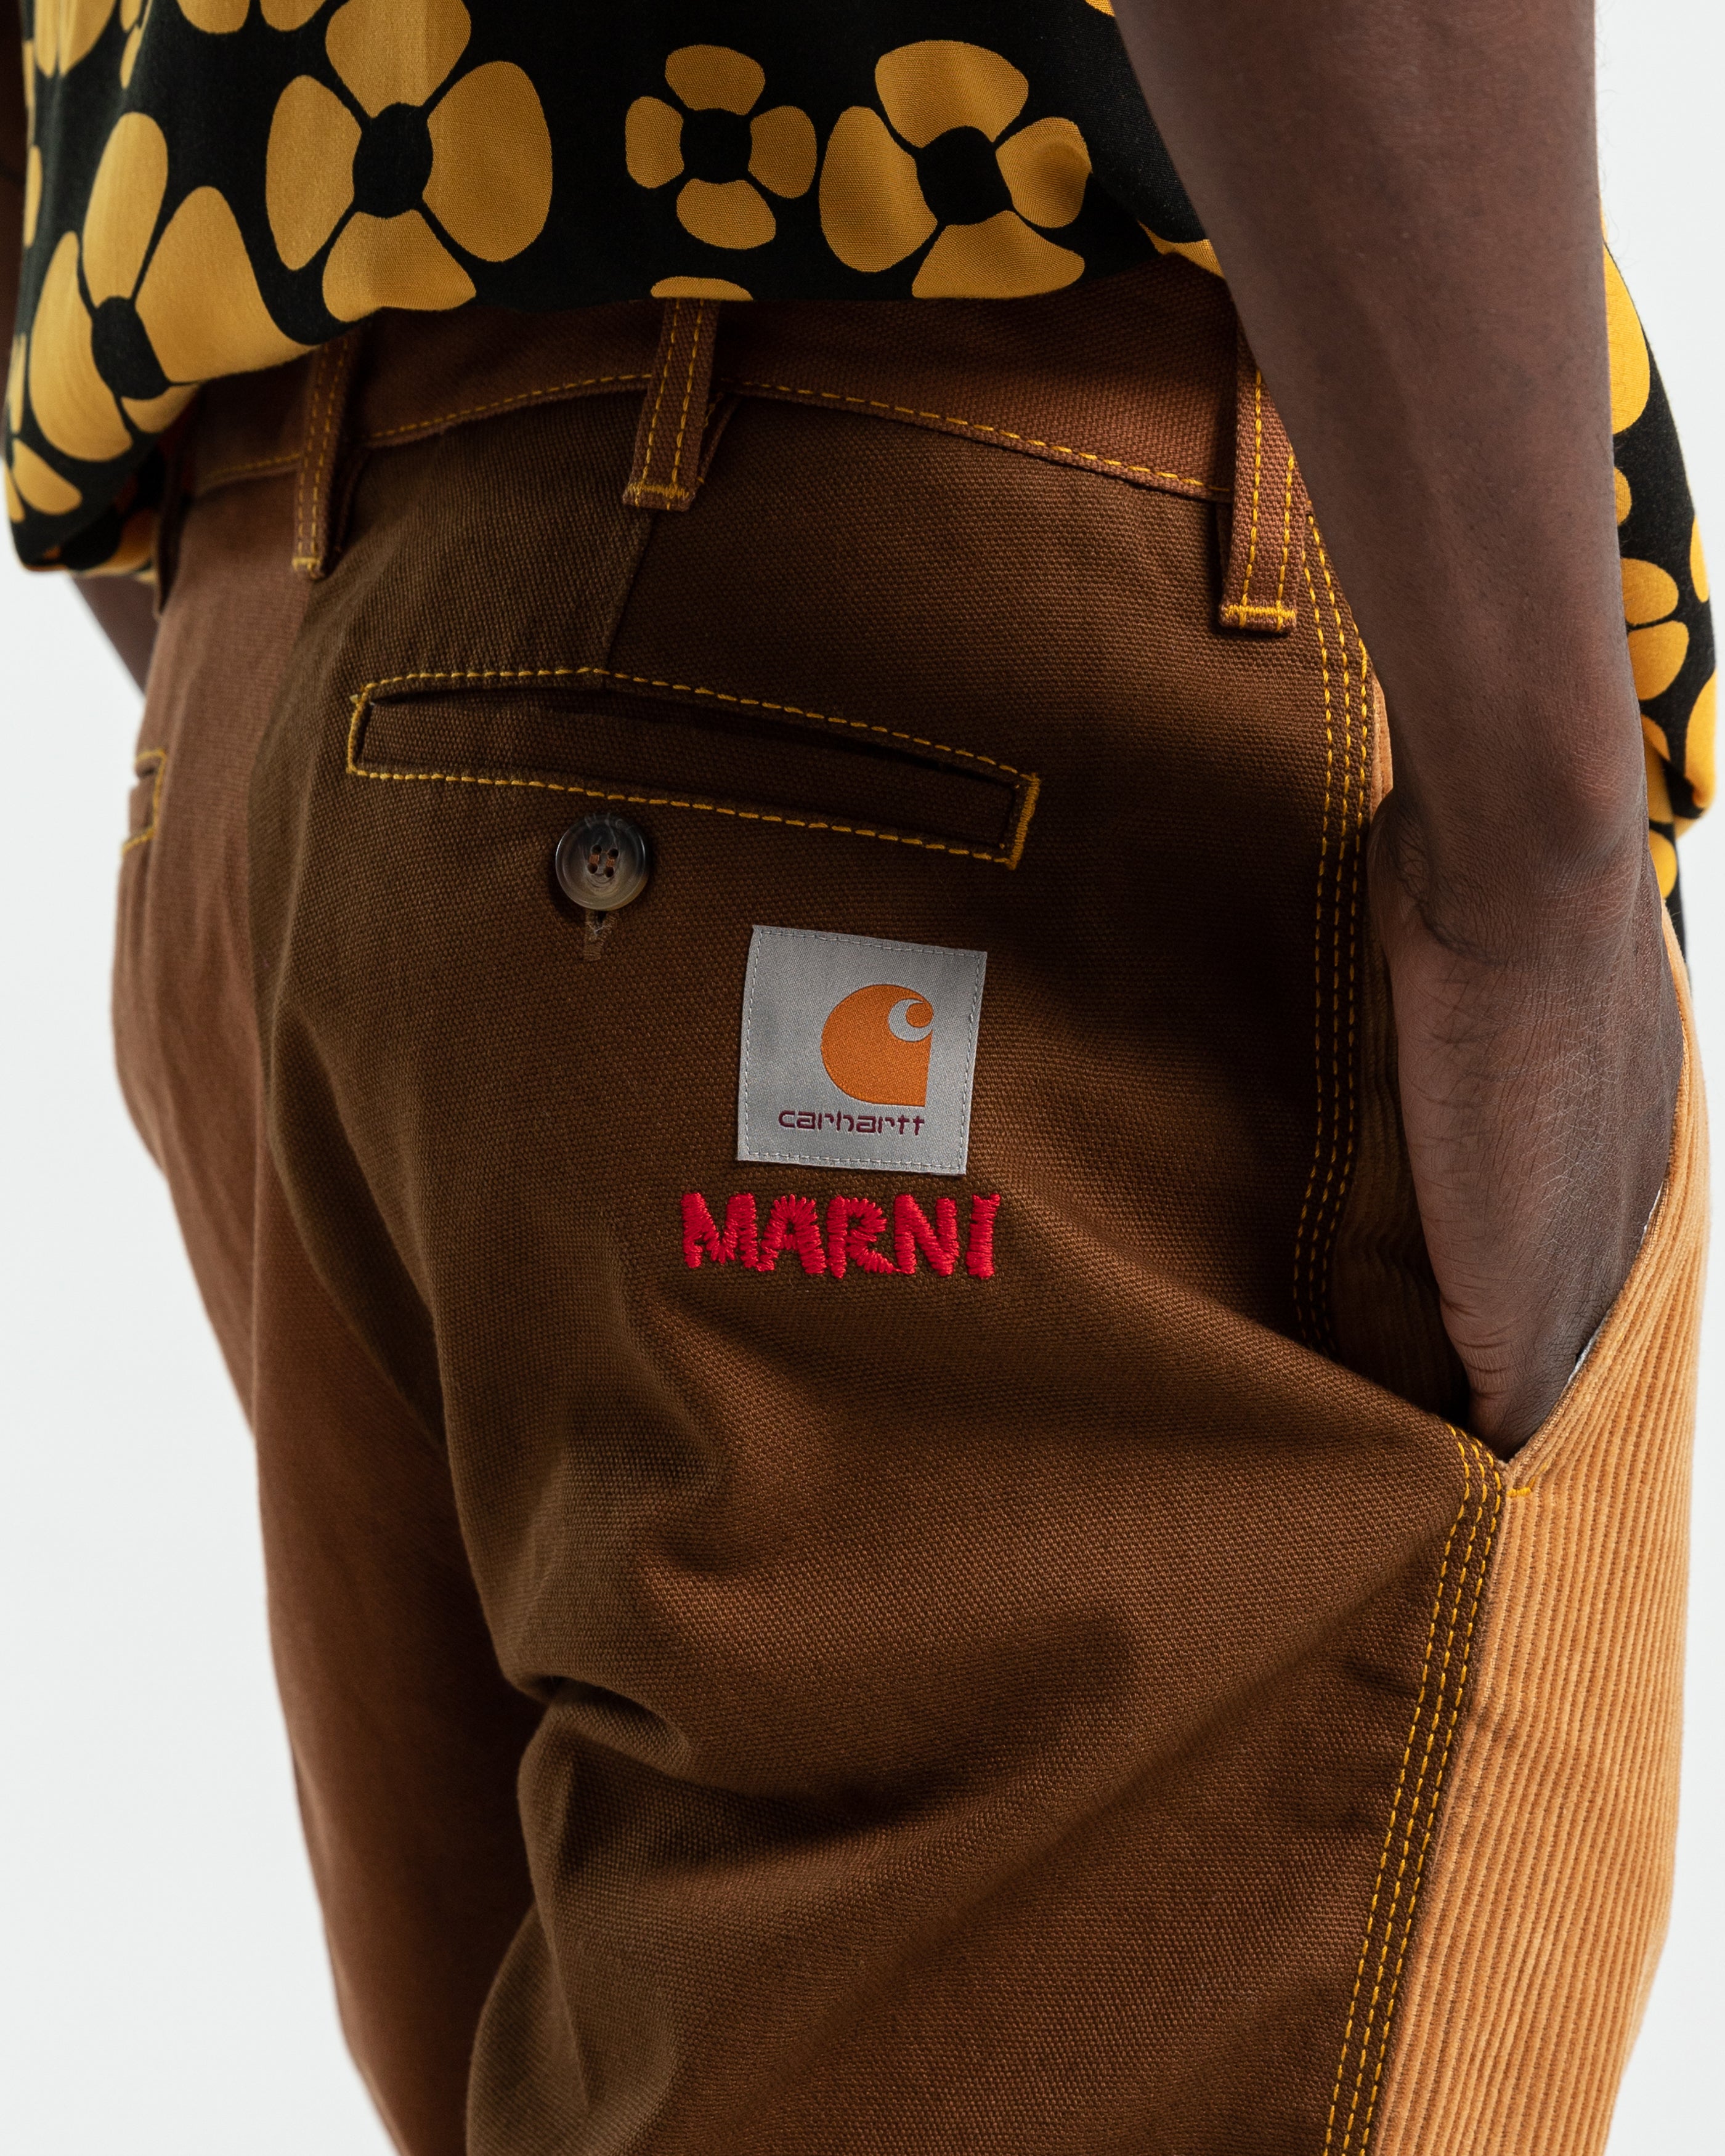 Canvas and Corduroy Work Pant in Tobacco